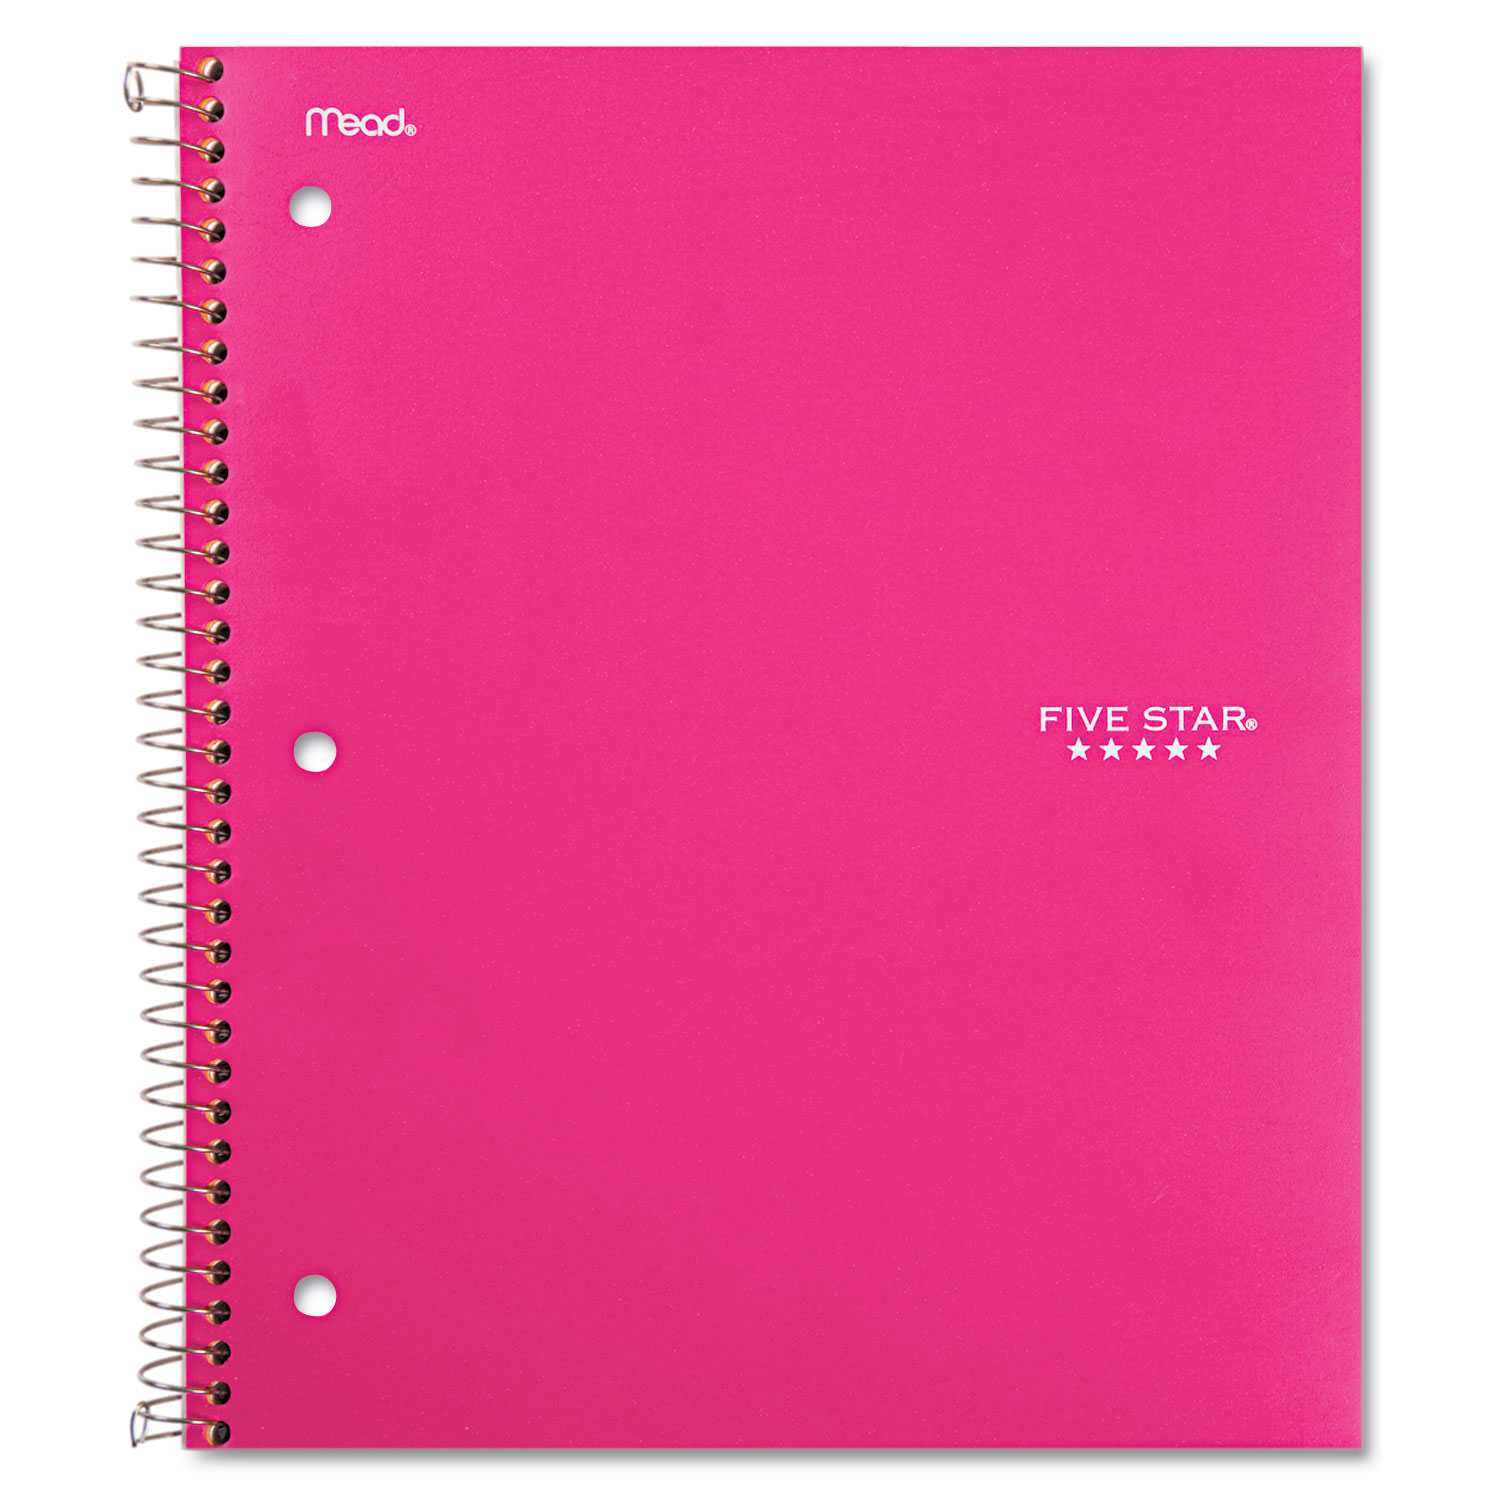  Five Star 73477 Wirebound Trend Notebook, 1 Subject, Wide/Legal Rule, Pink Cover, 10.5 x 8, 100 Sheets (MEA73477) 